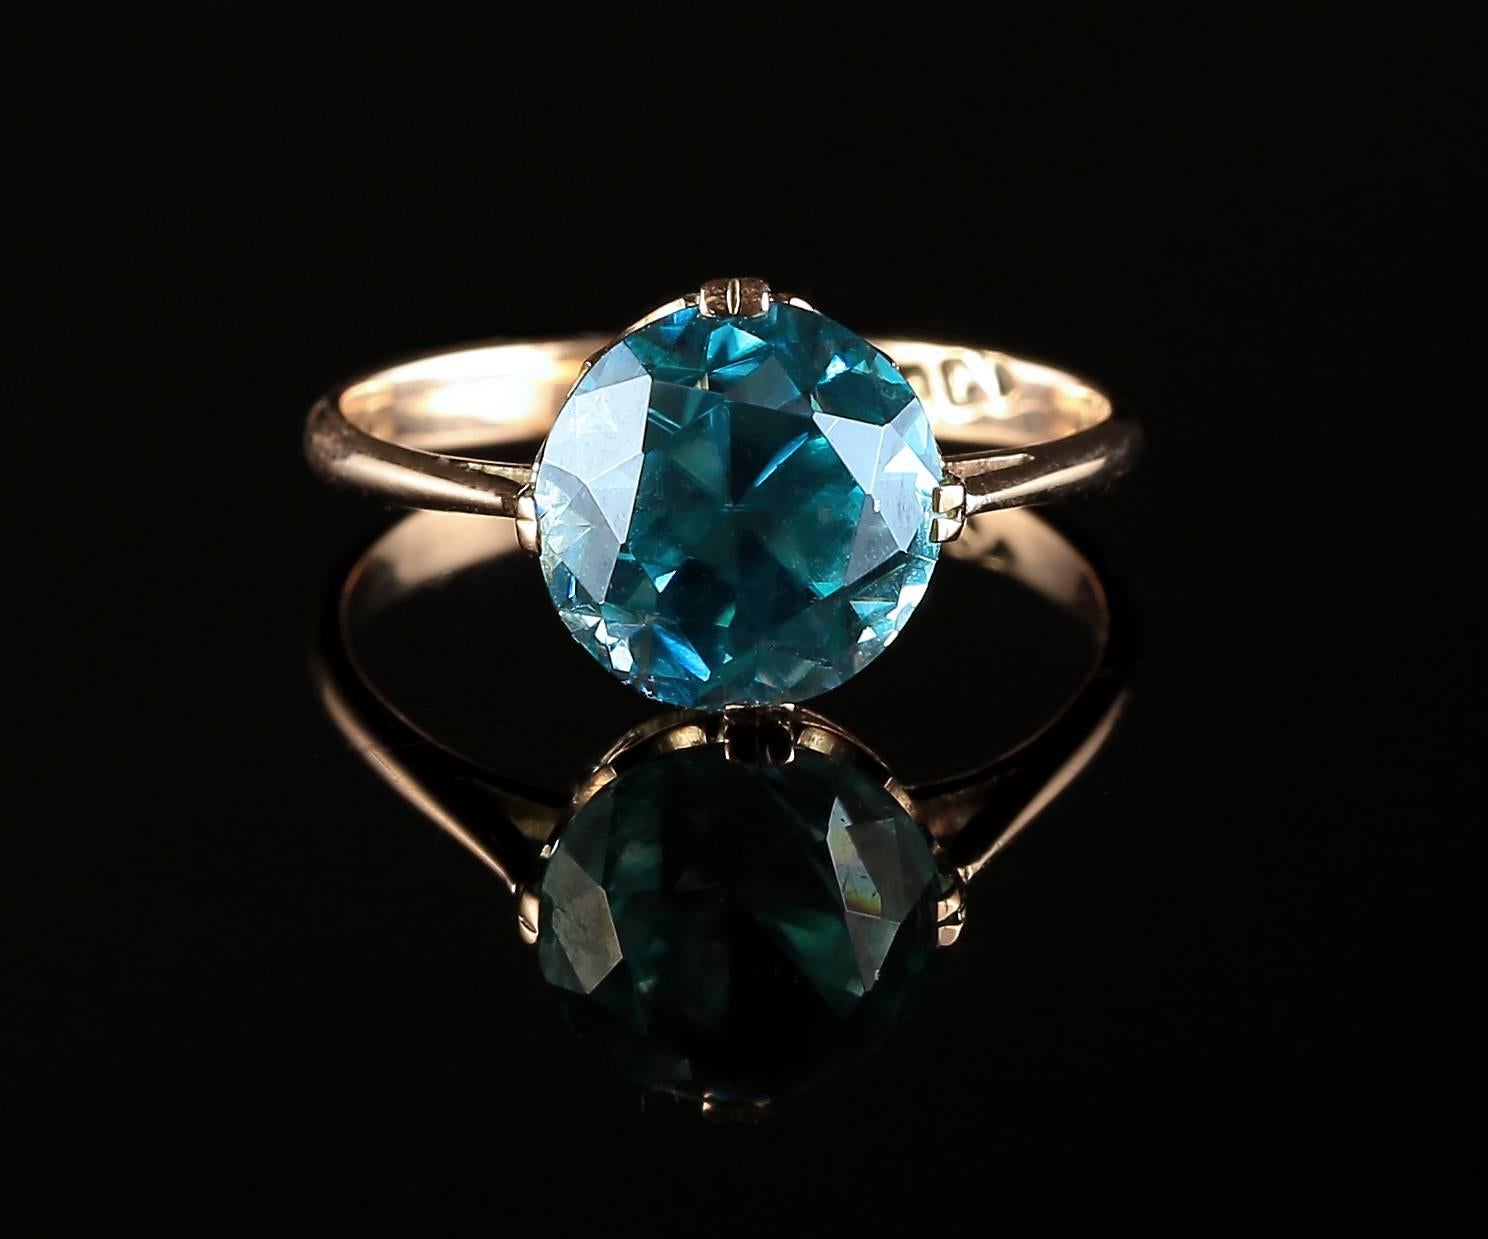 This genuine Victorian 9ct yellow gold ring is set with 5.60ct Natural Blue 
Zircon ( tested ) 

Blue Zircon is the birth stone for December 
In the middle ages Zircon was said to aid sleep, bring prosperity and promote honour and wisdom in its